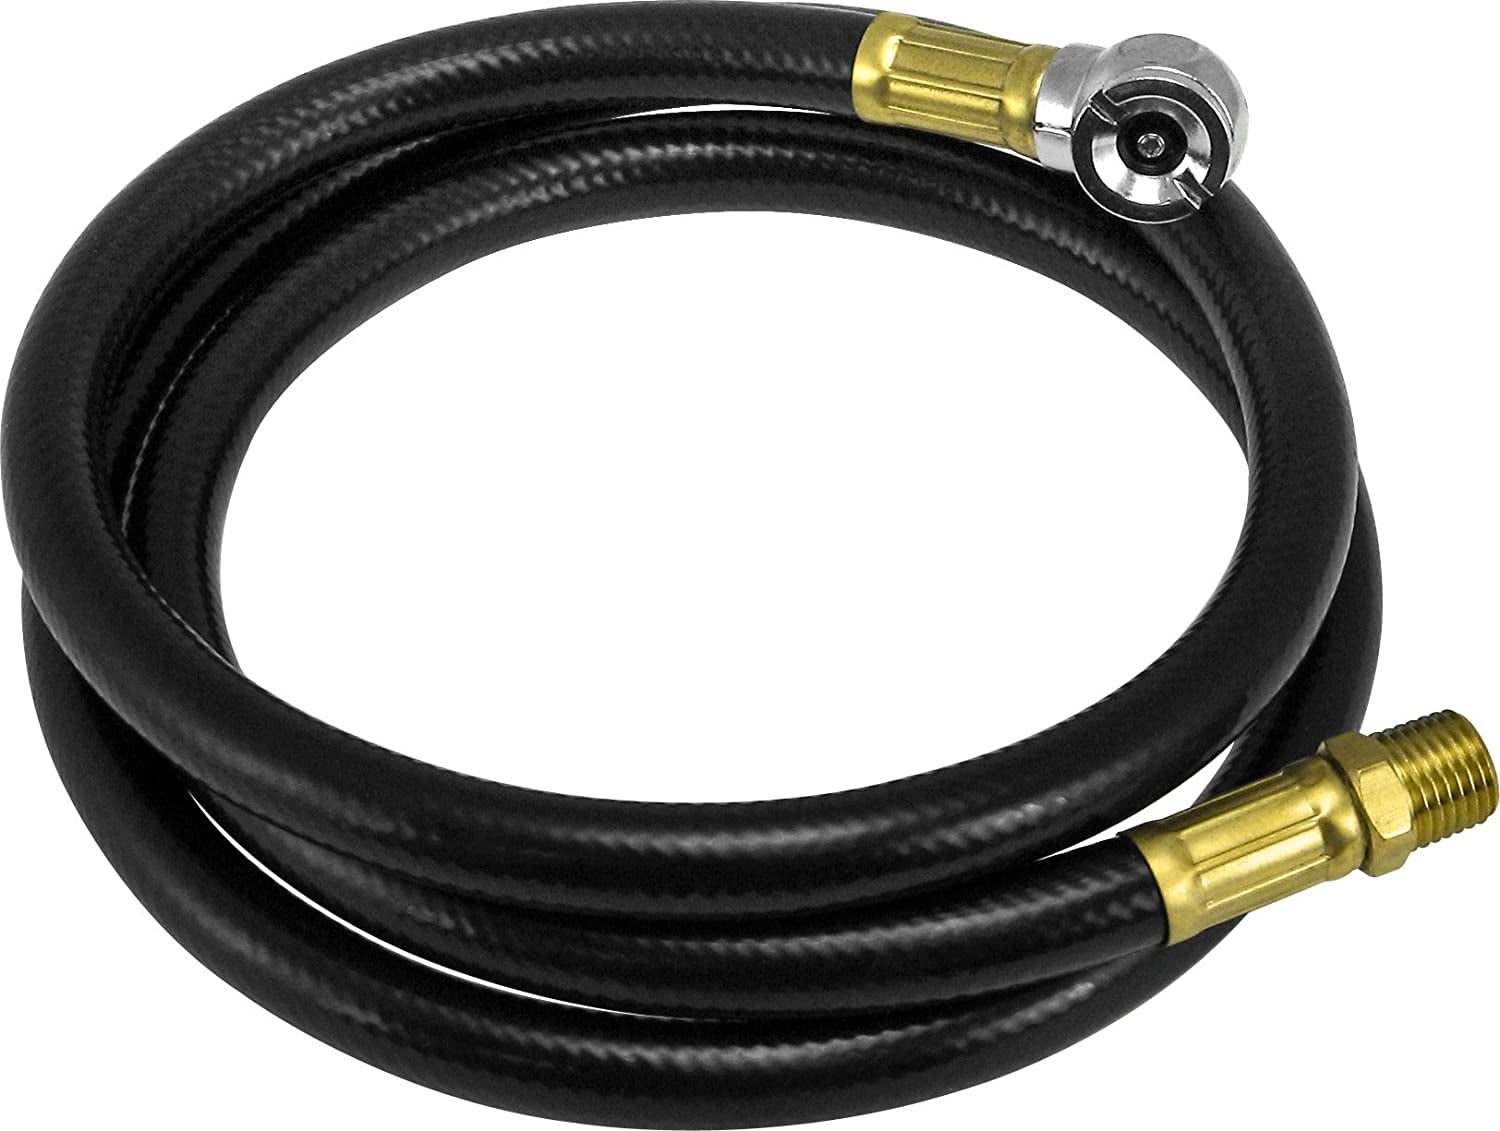 Victor 22-5-63000-8 4 Air Hose with Tire Chuck 